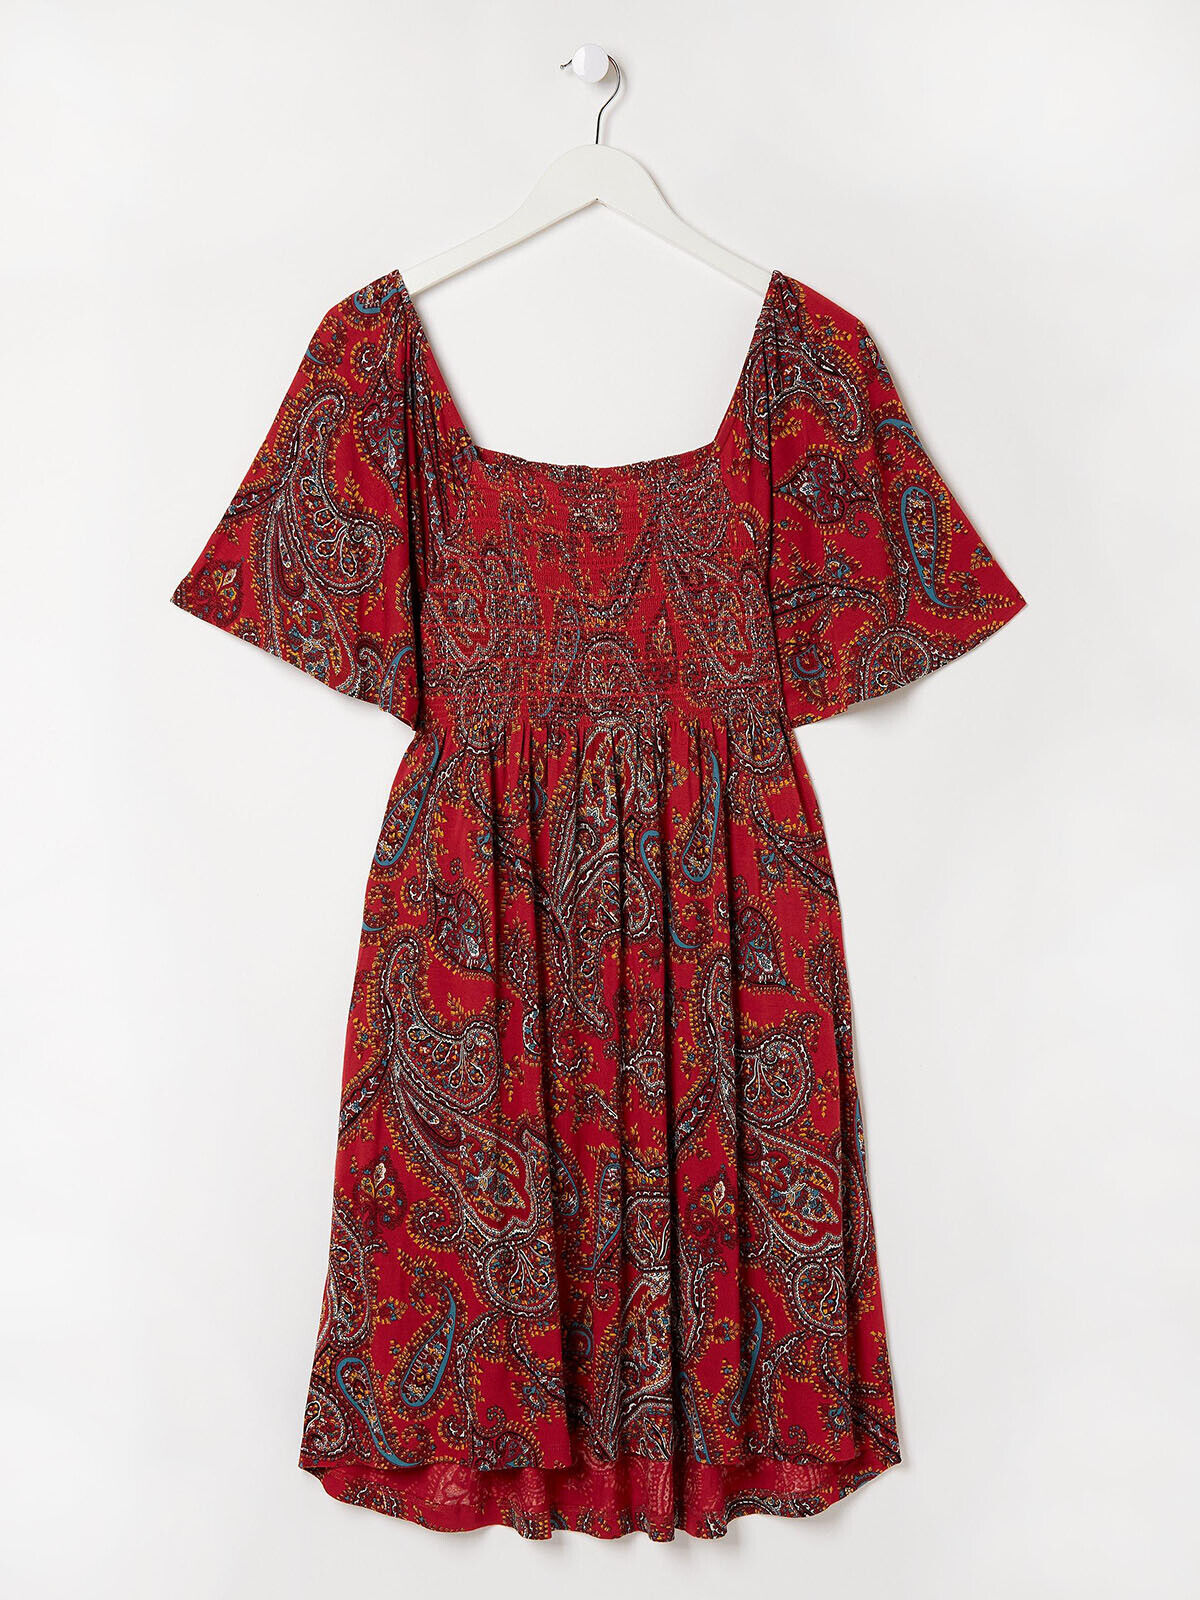 EX Fat Face Cherry Red Sunkissed Paisley Smocked Alice Dress 6 8 12 14 16 18 24